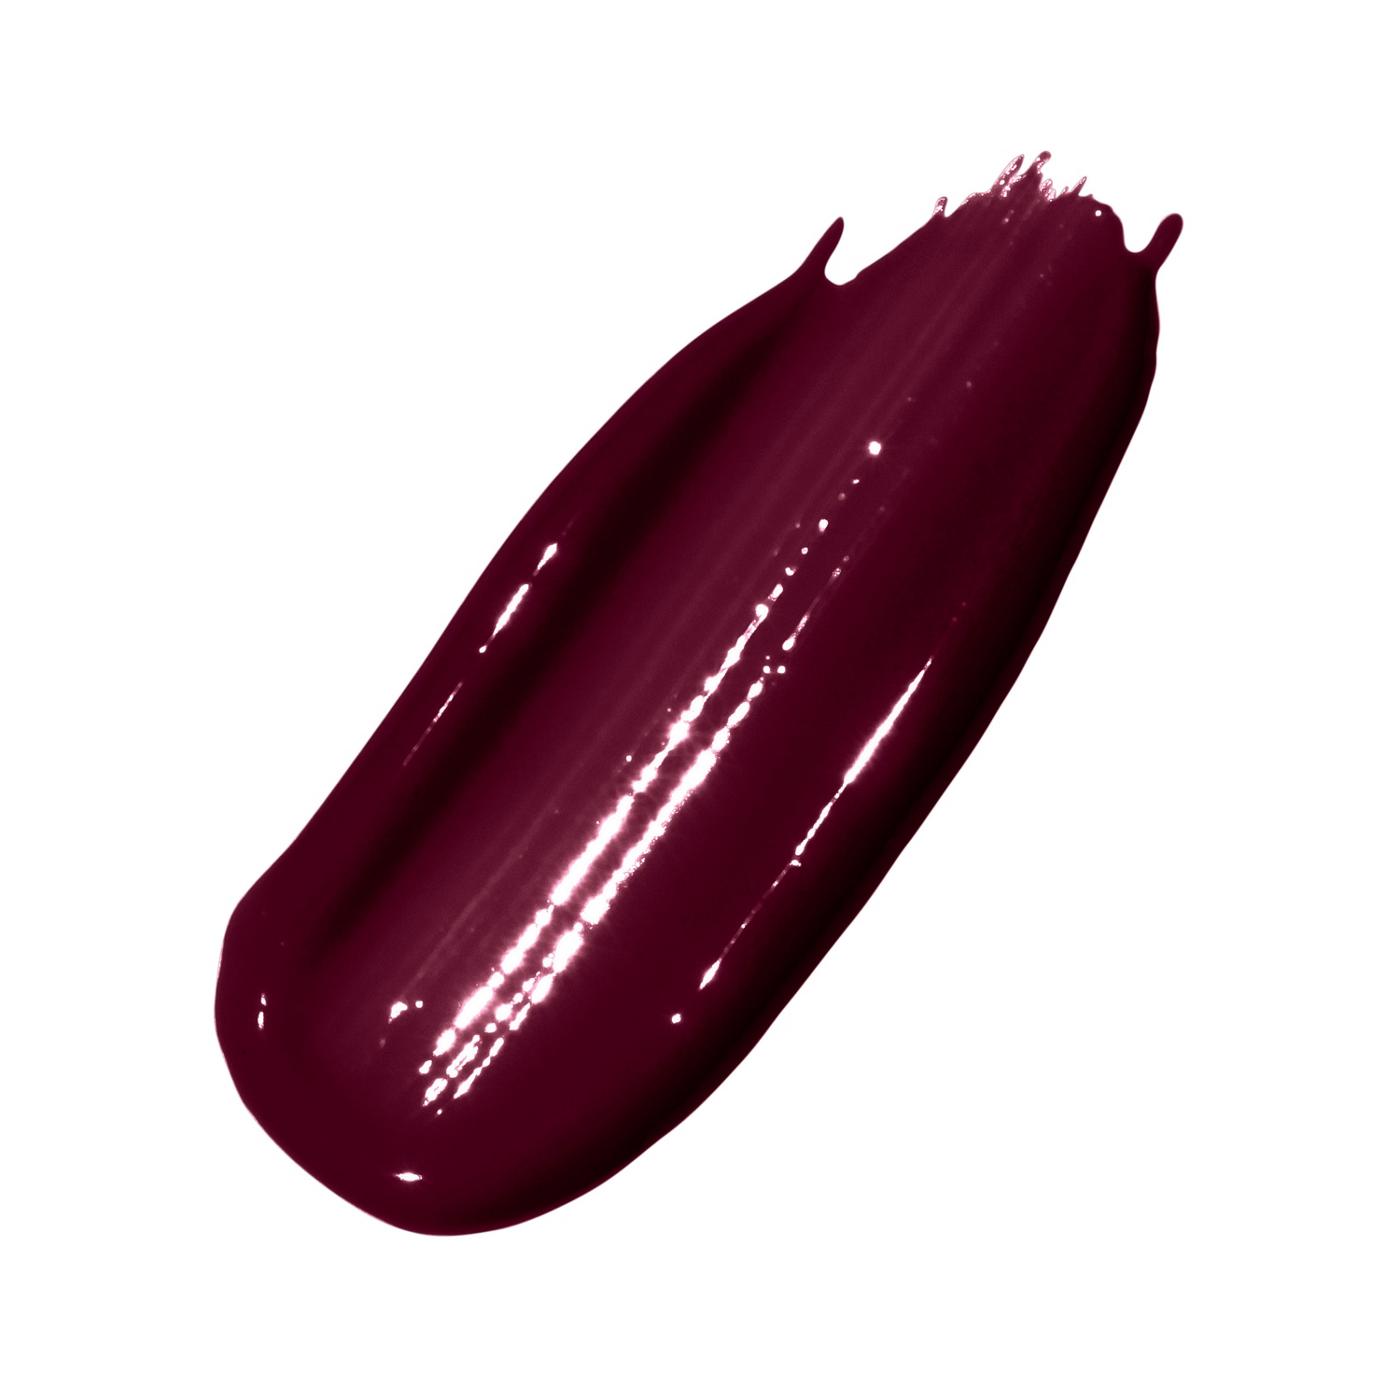 Revlon ColorStay Satin Ink Crown Jewels Liquid Lipstick, Reigning Red; image 2 of 7